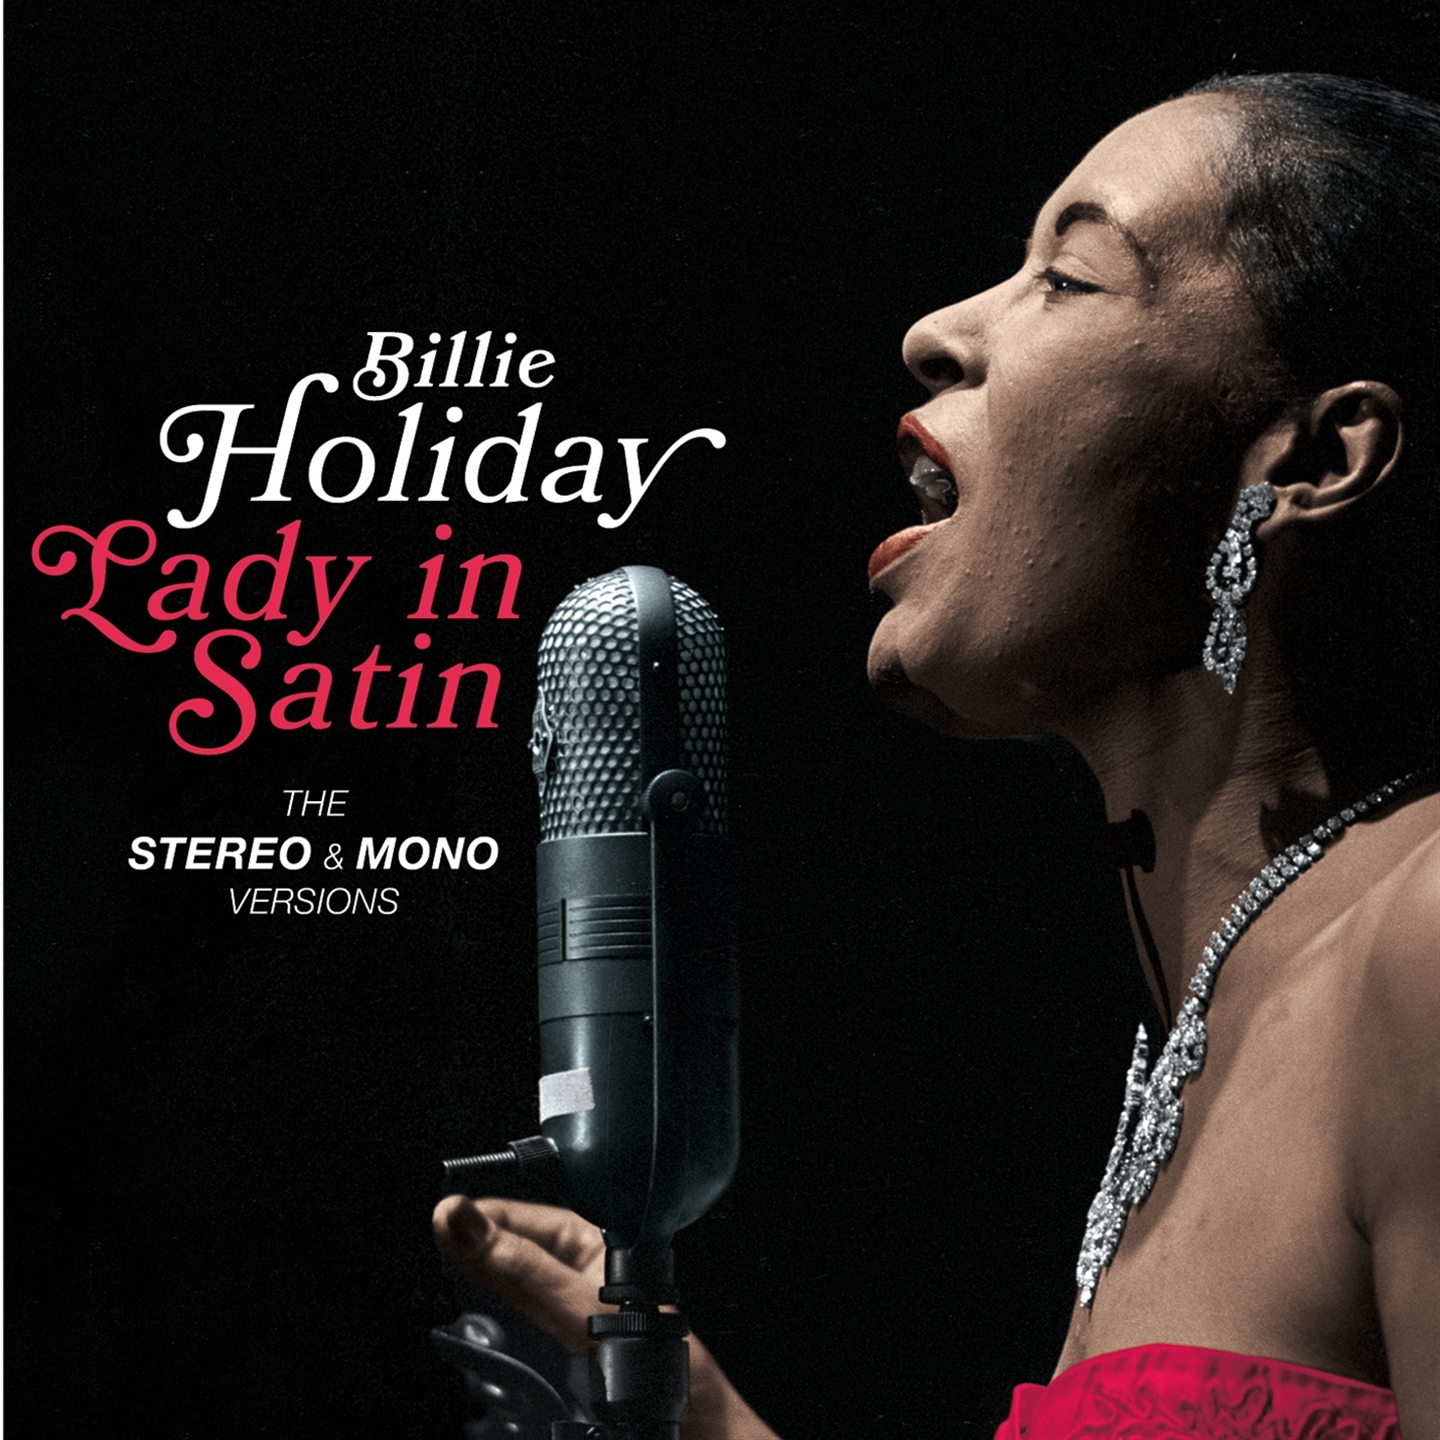 Billie Holiday - Lady In Satin - The Mono & Stereo Versions - Picture 1 of 1